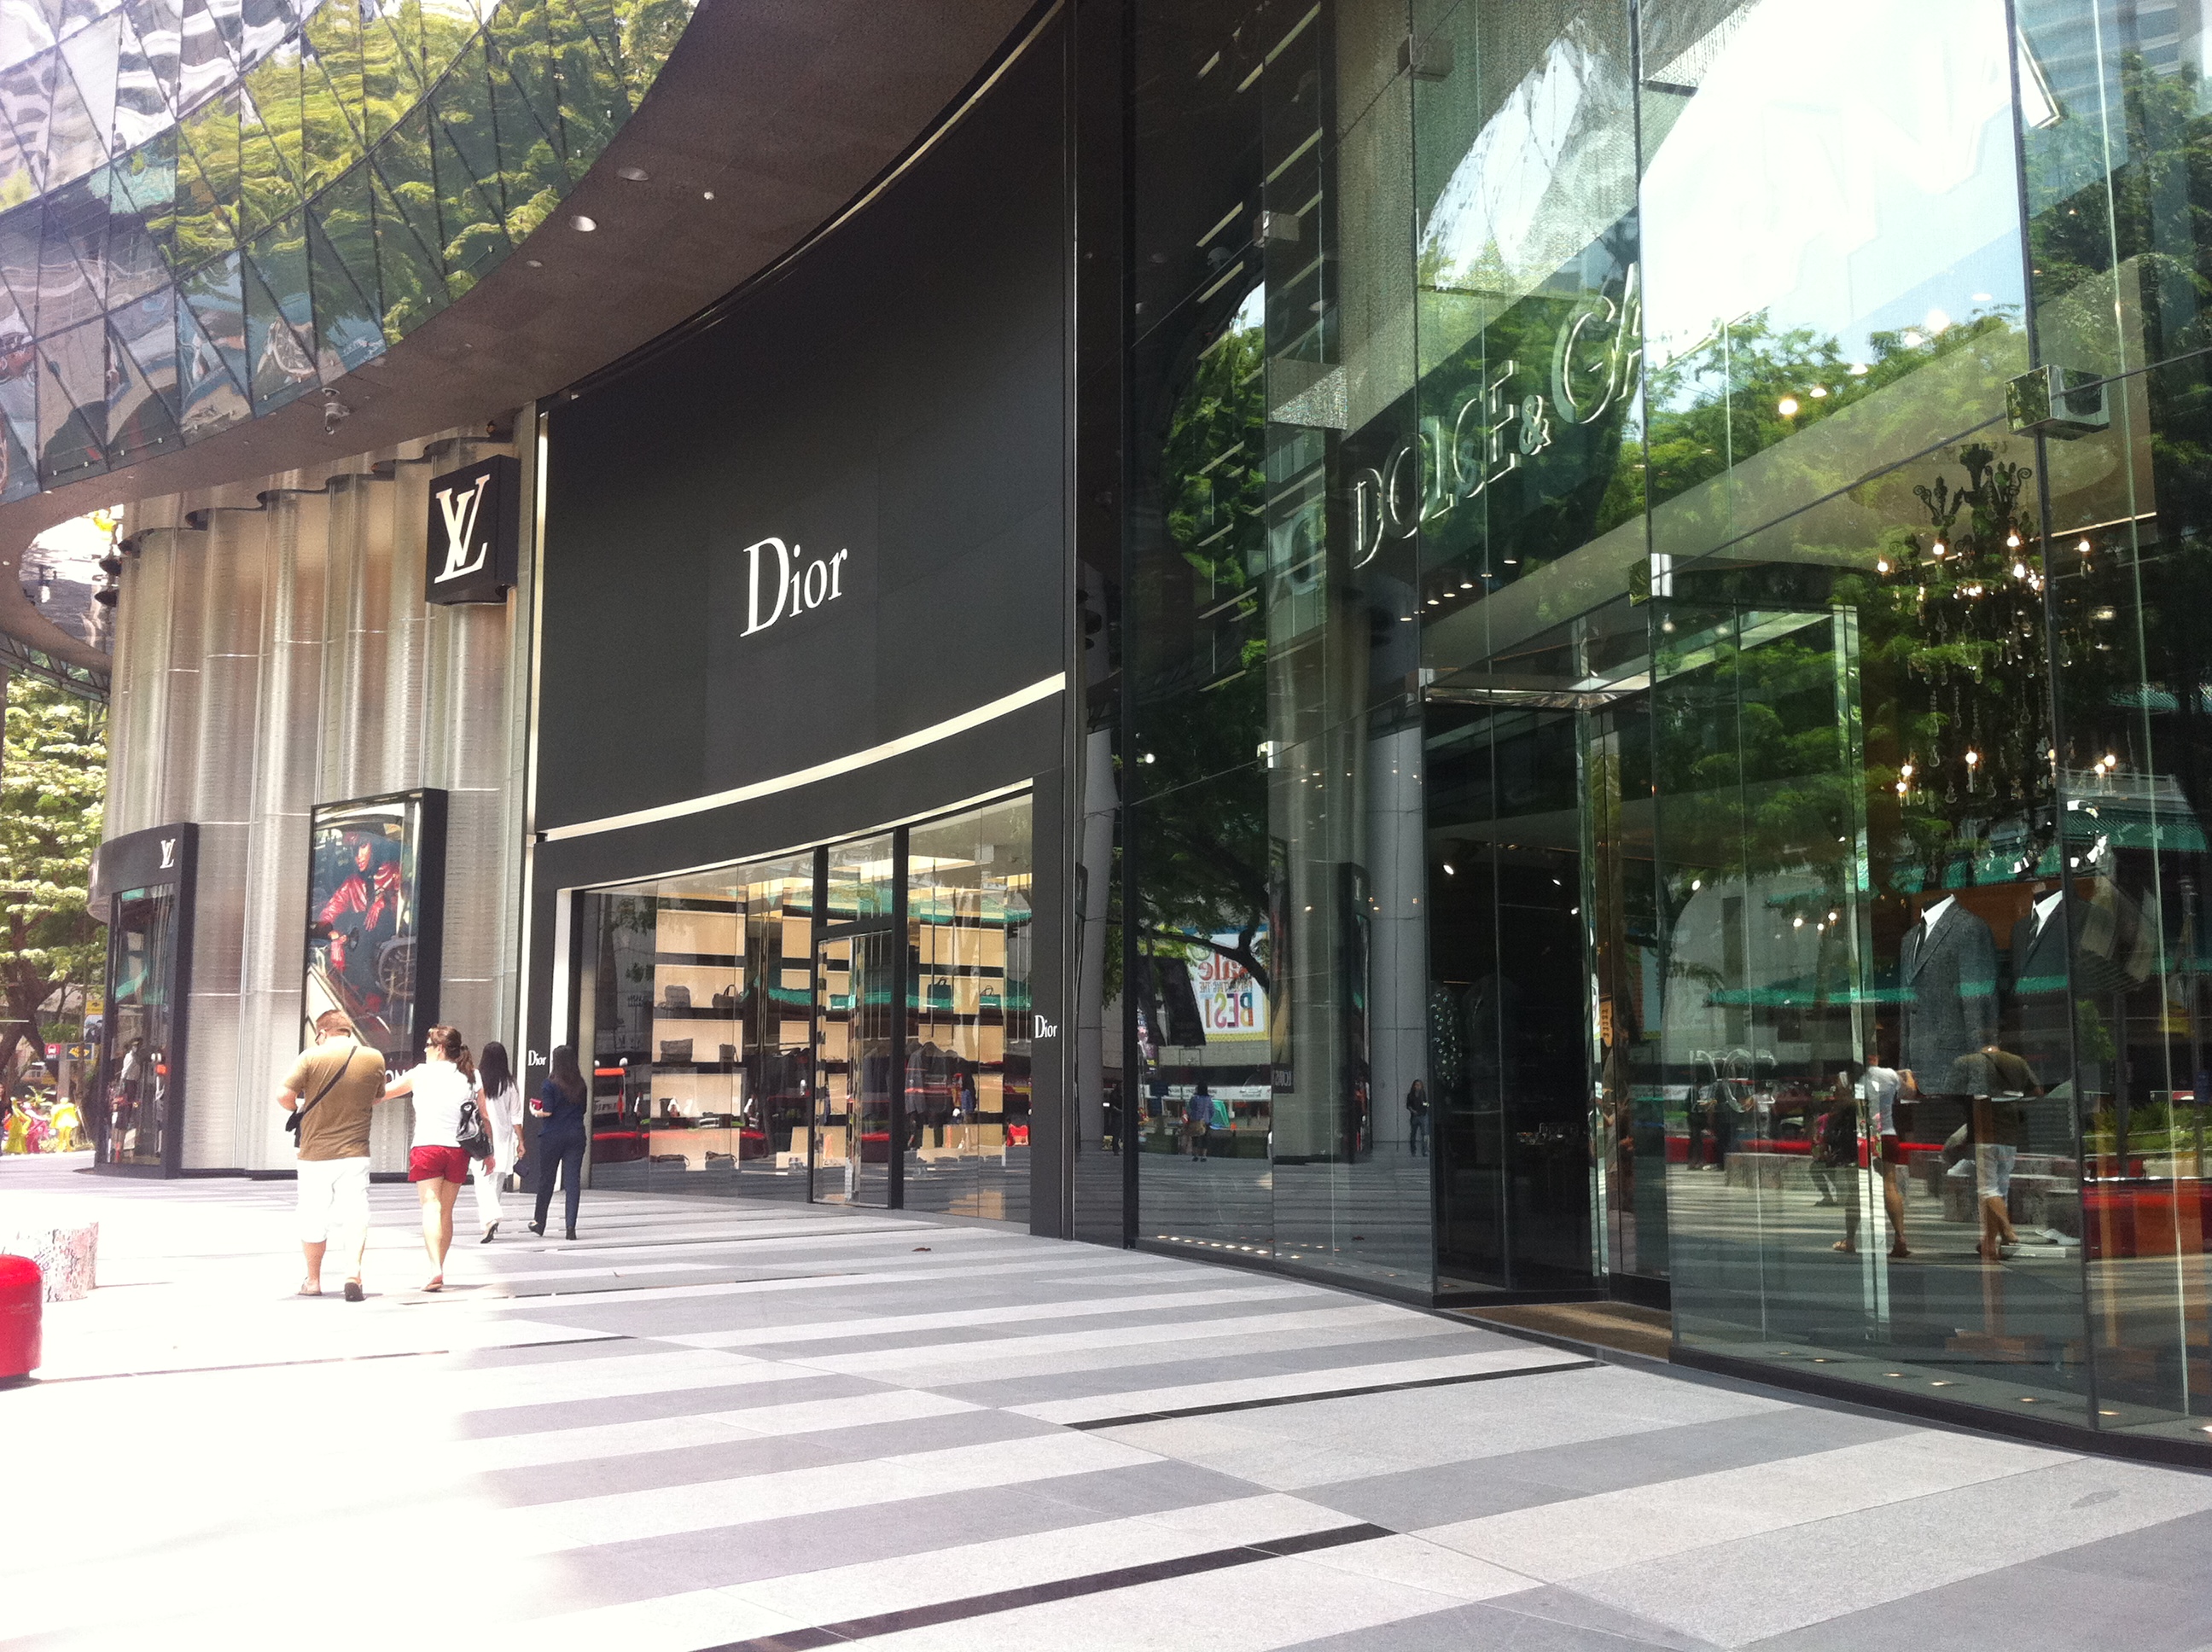 From There to Here: Friends, Shopping, Eating & New Heights in Singapore